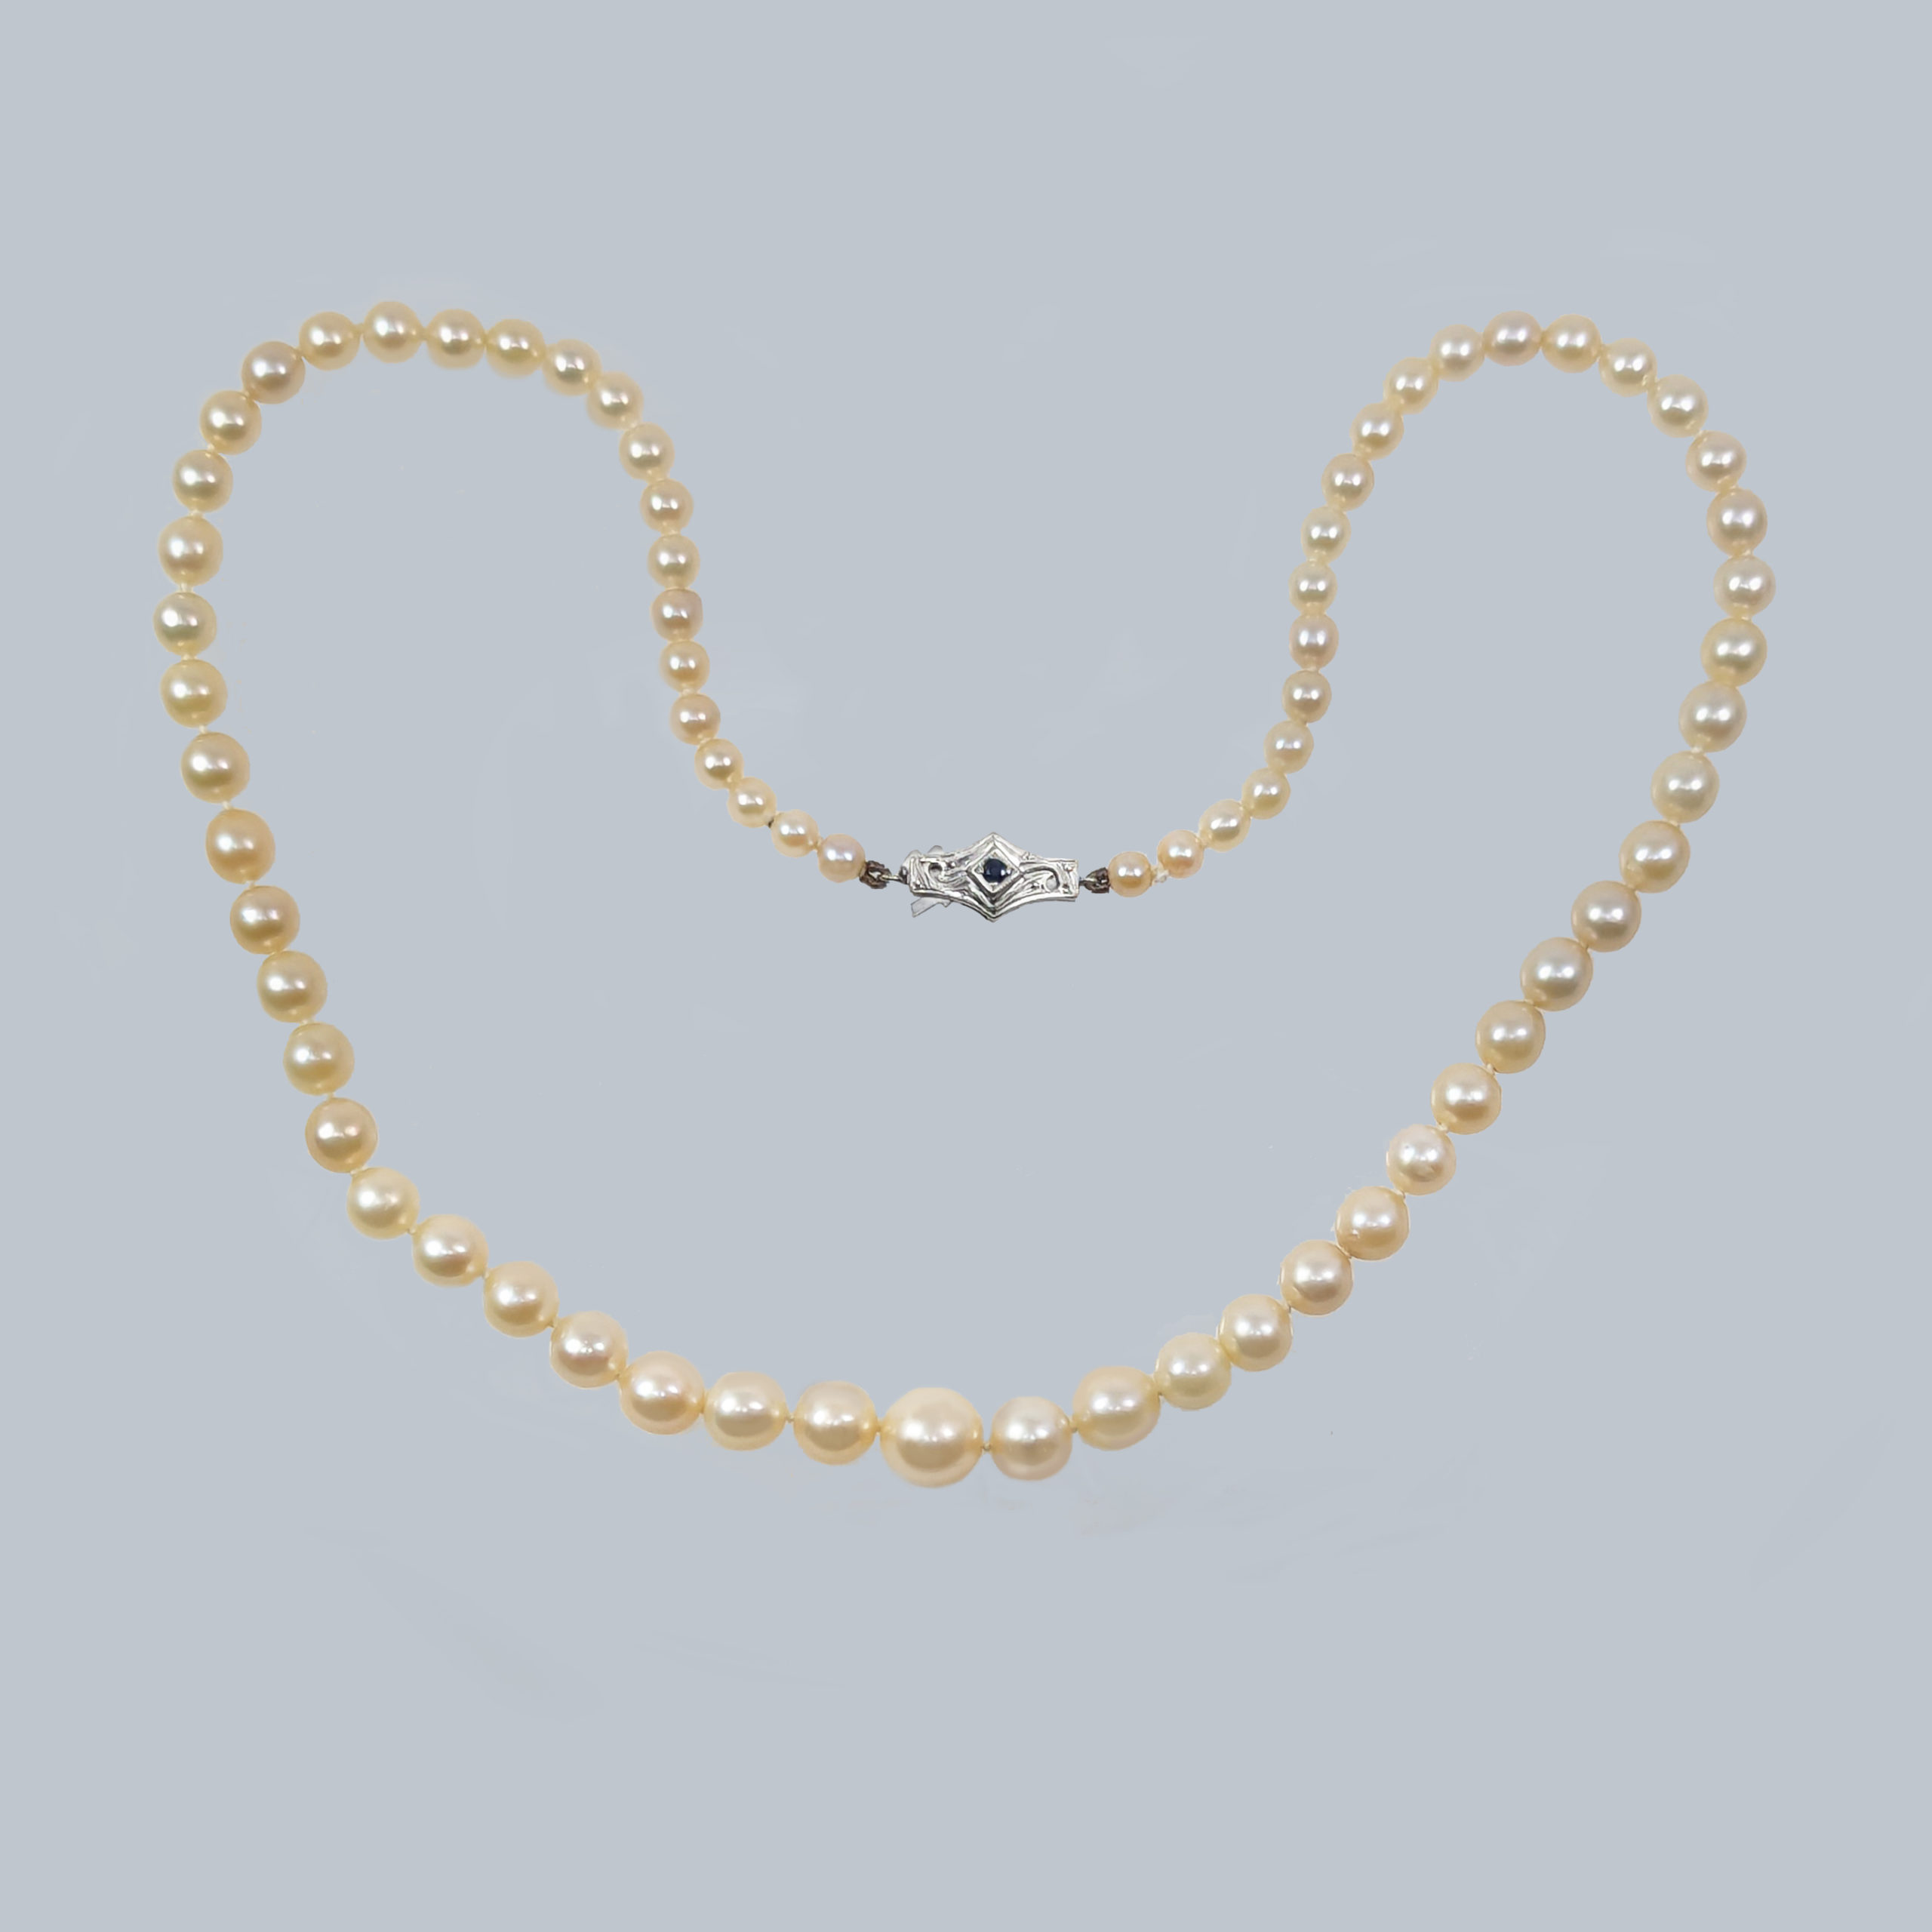 cultured graduating pearl necklace